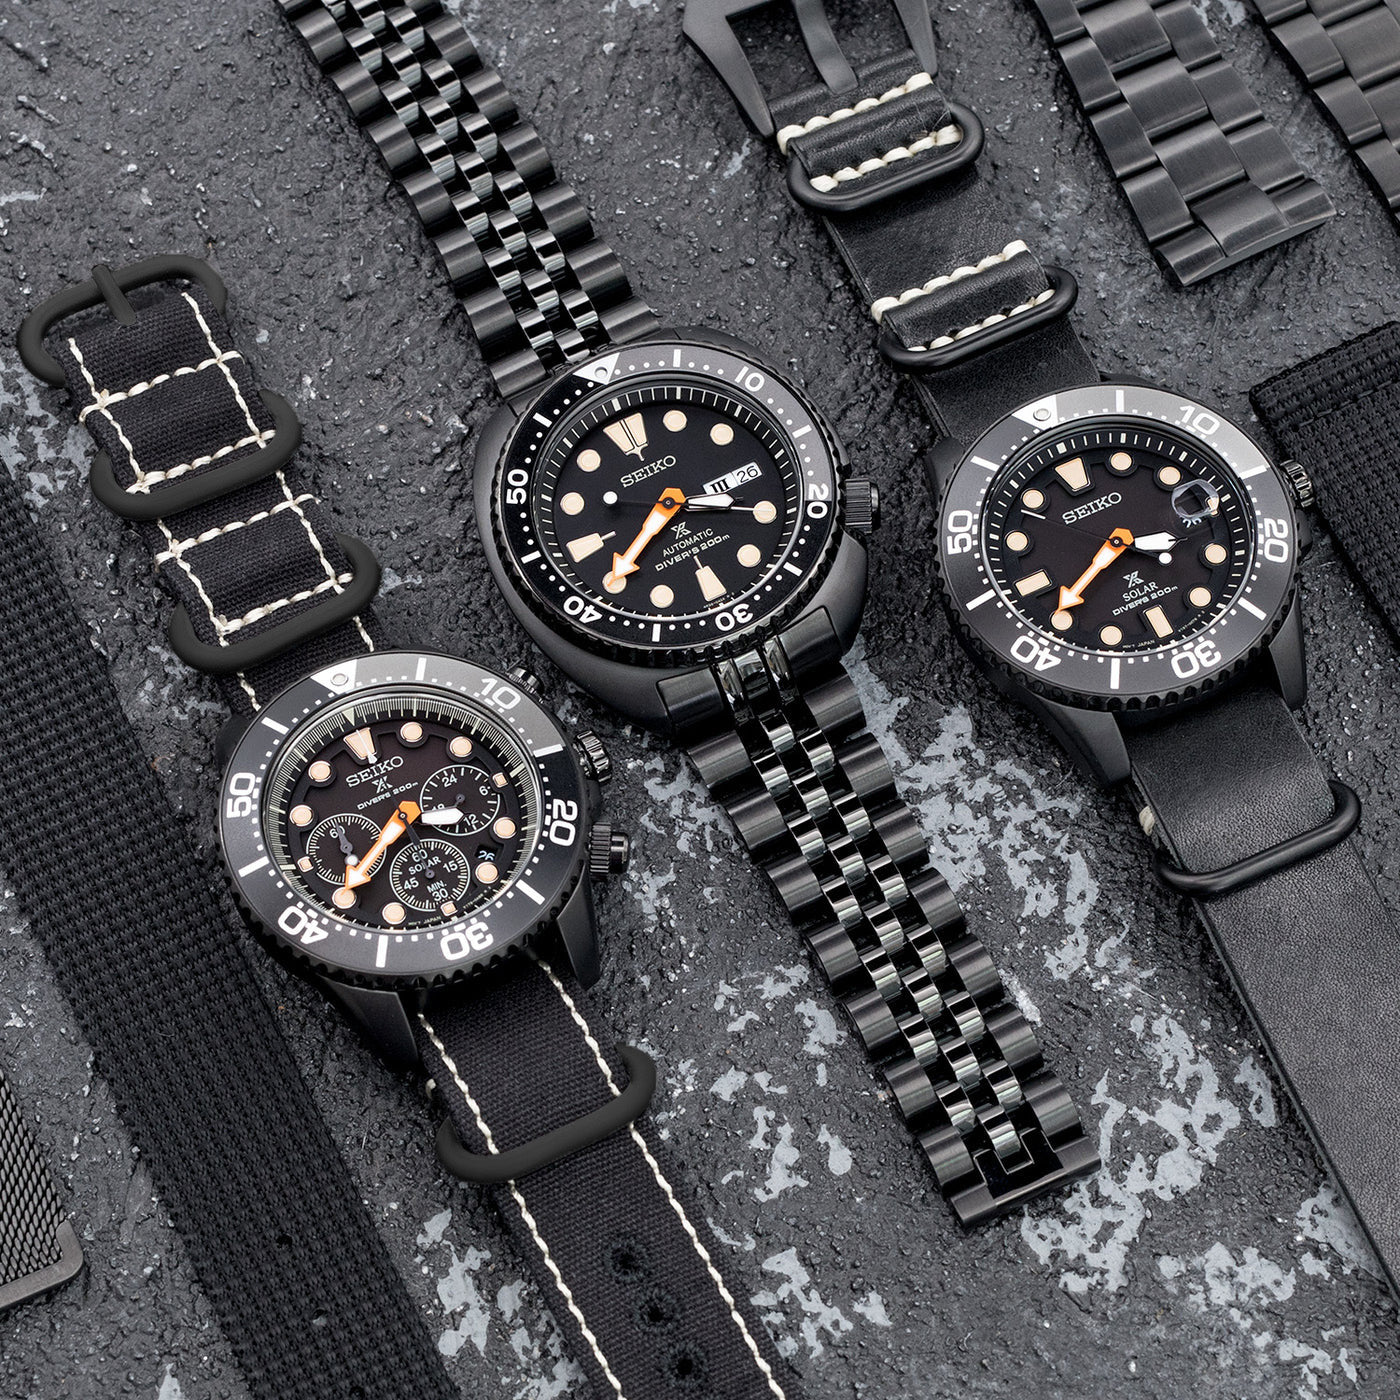 PVD vs DLC,  which one is the best for a black watch?